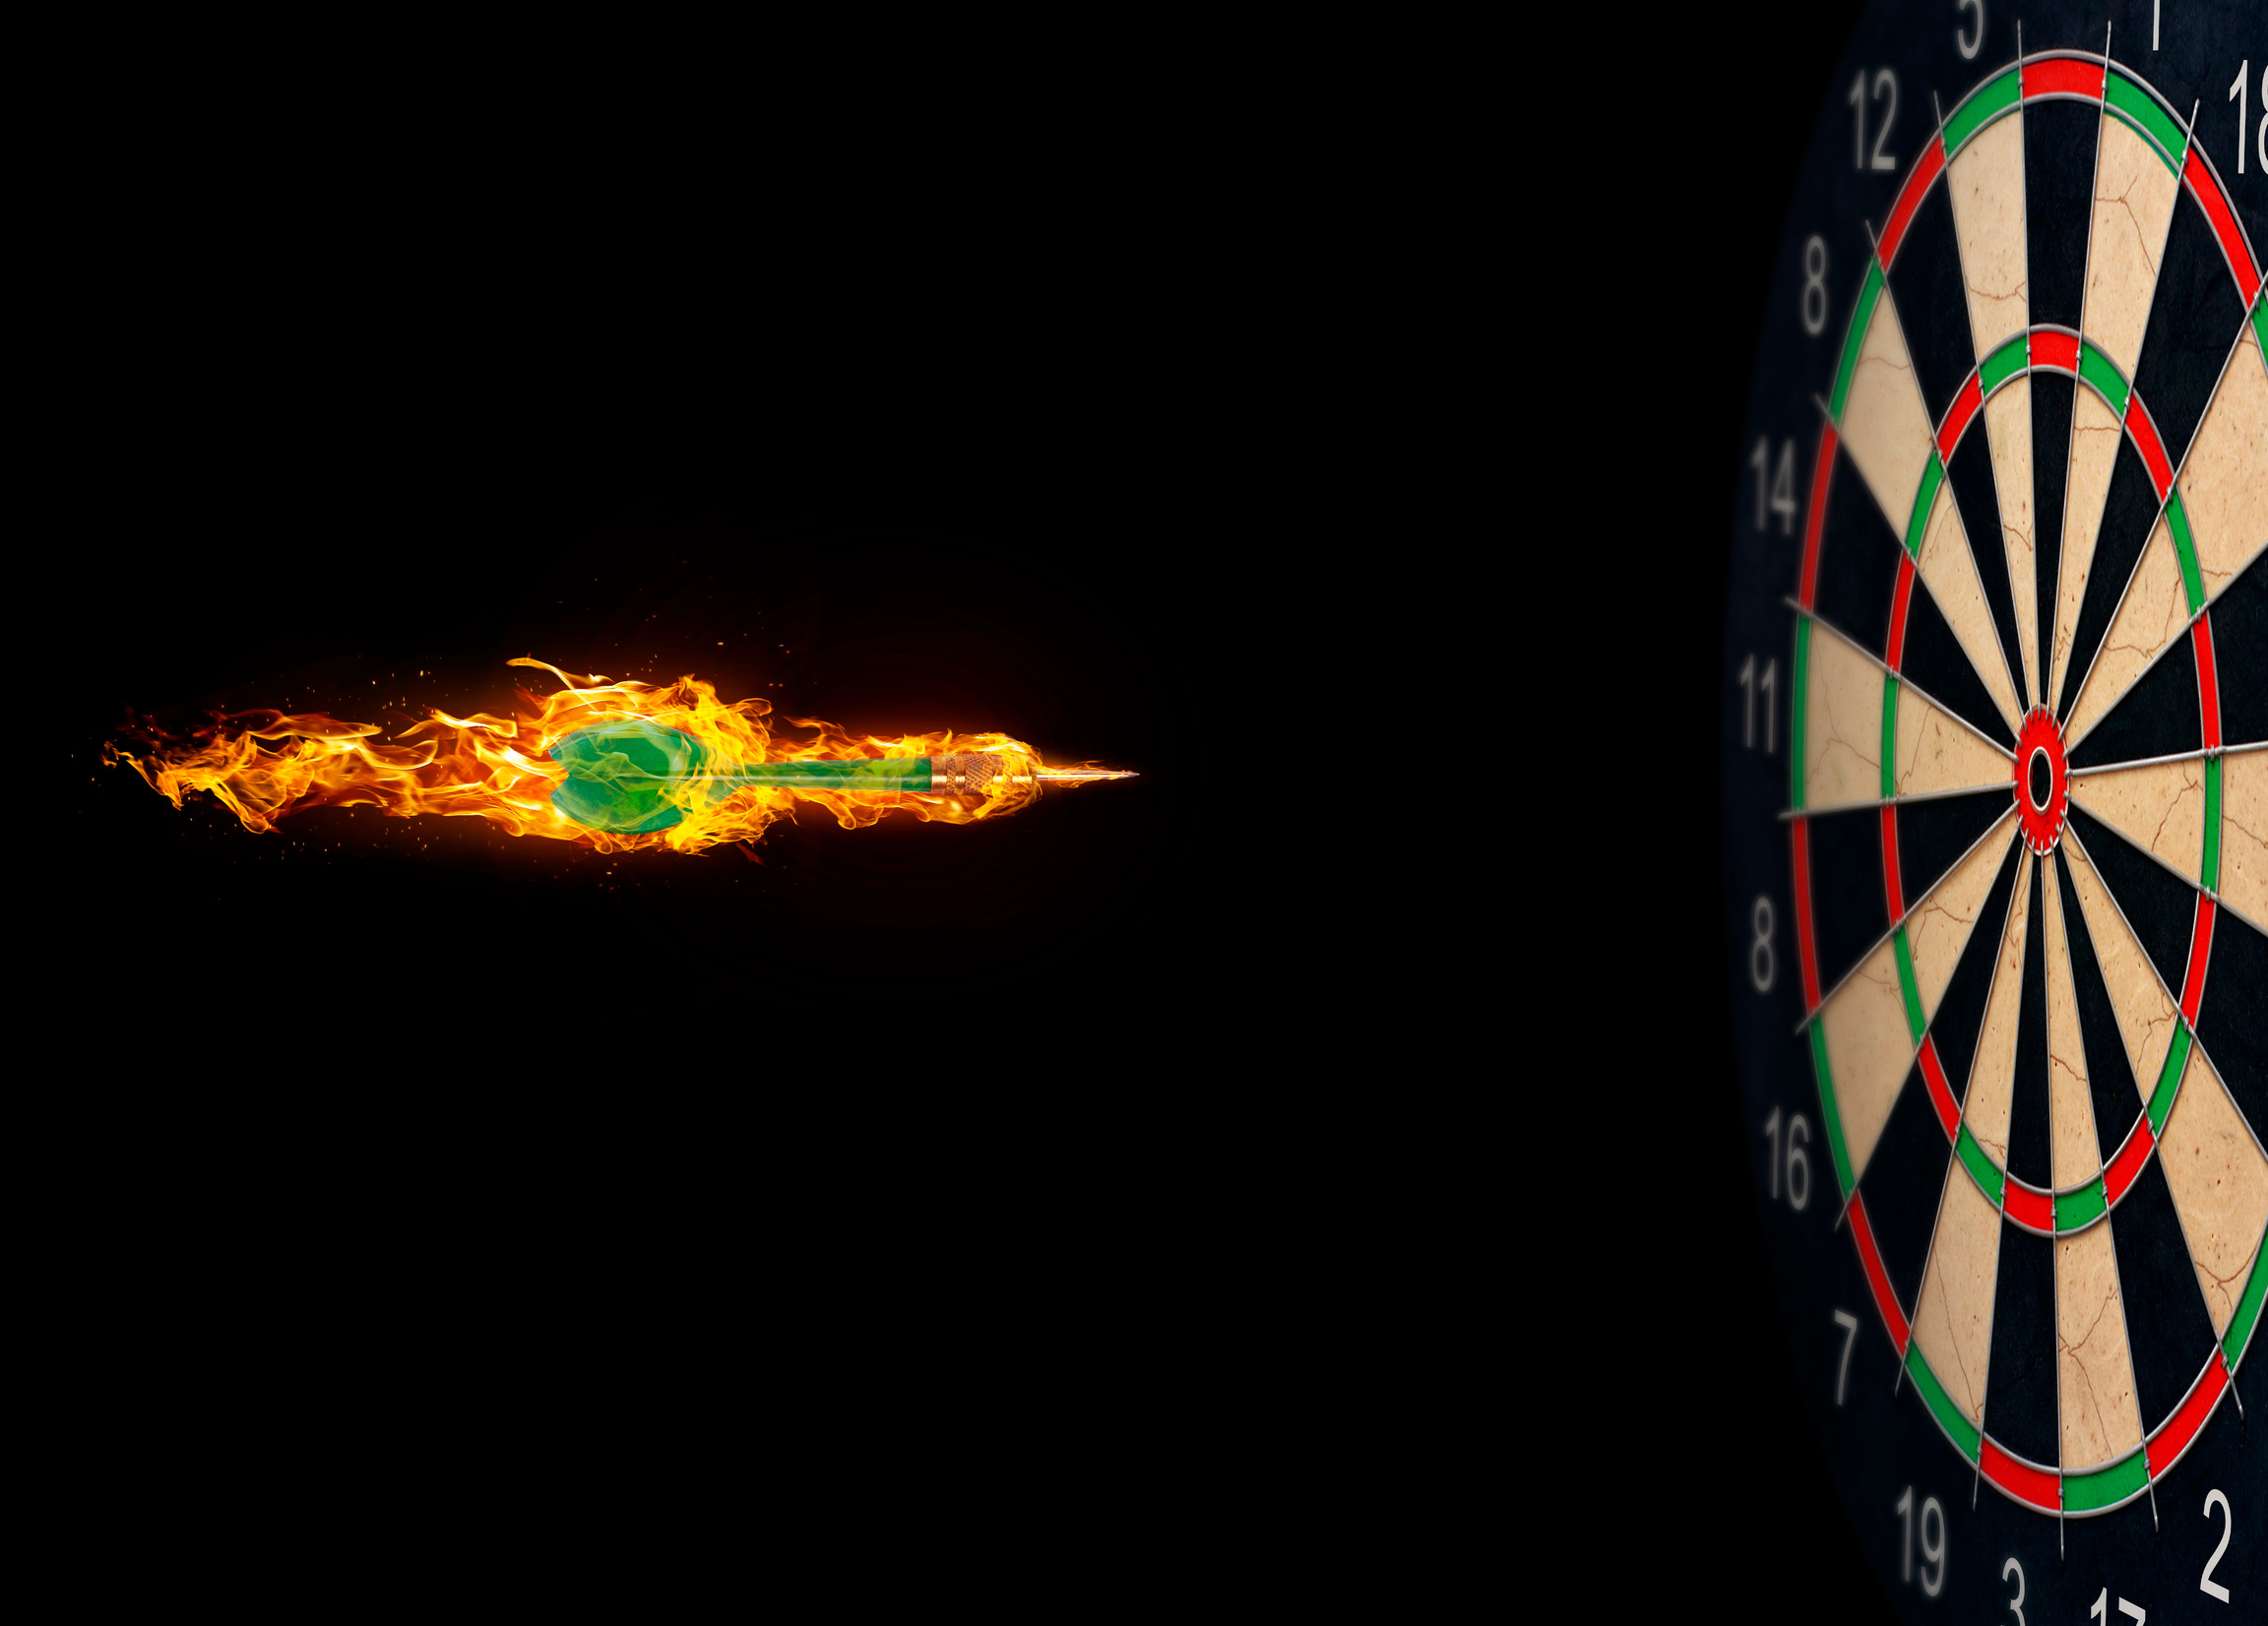 Darts, on fire flying to the target